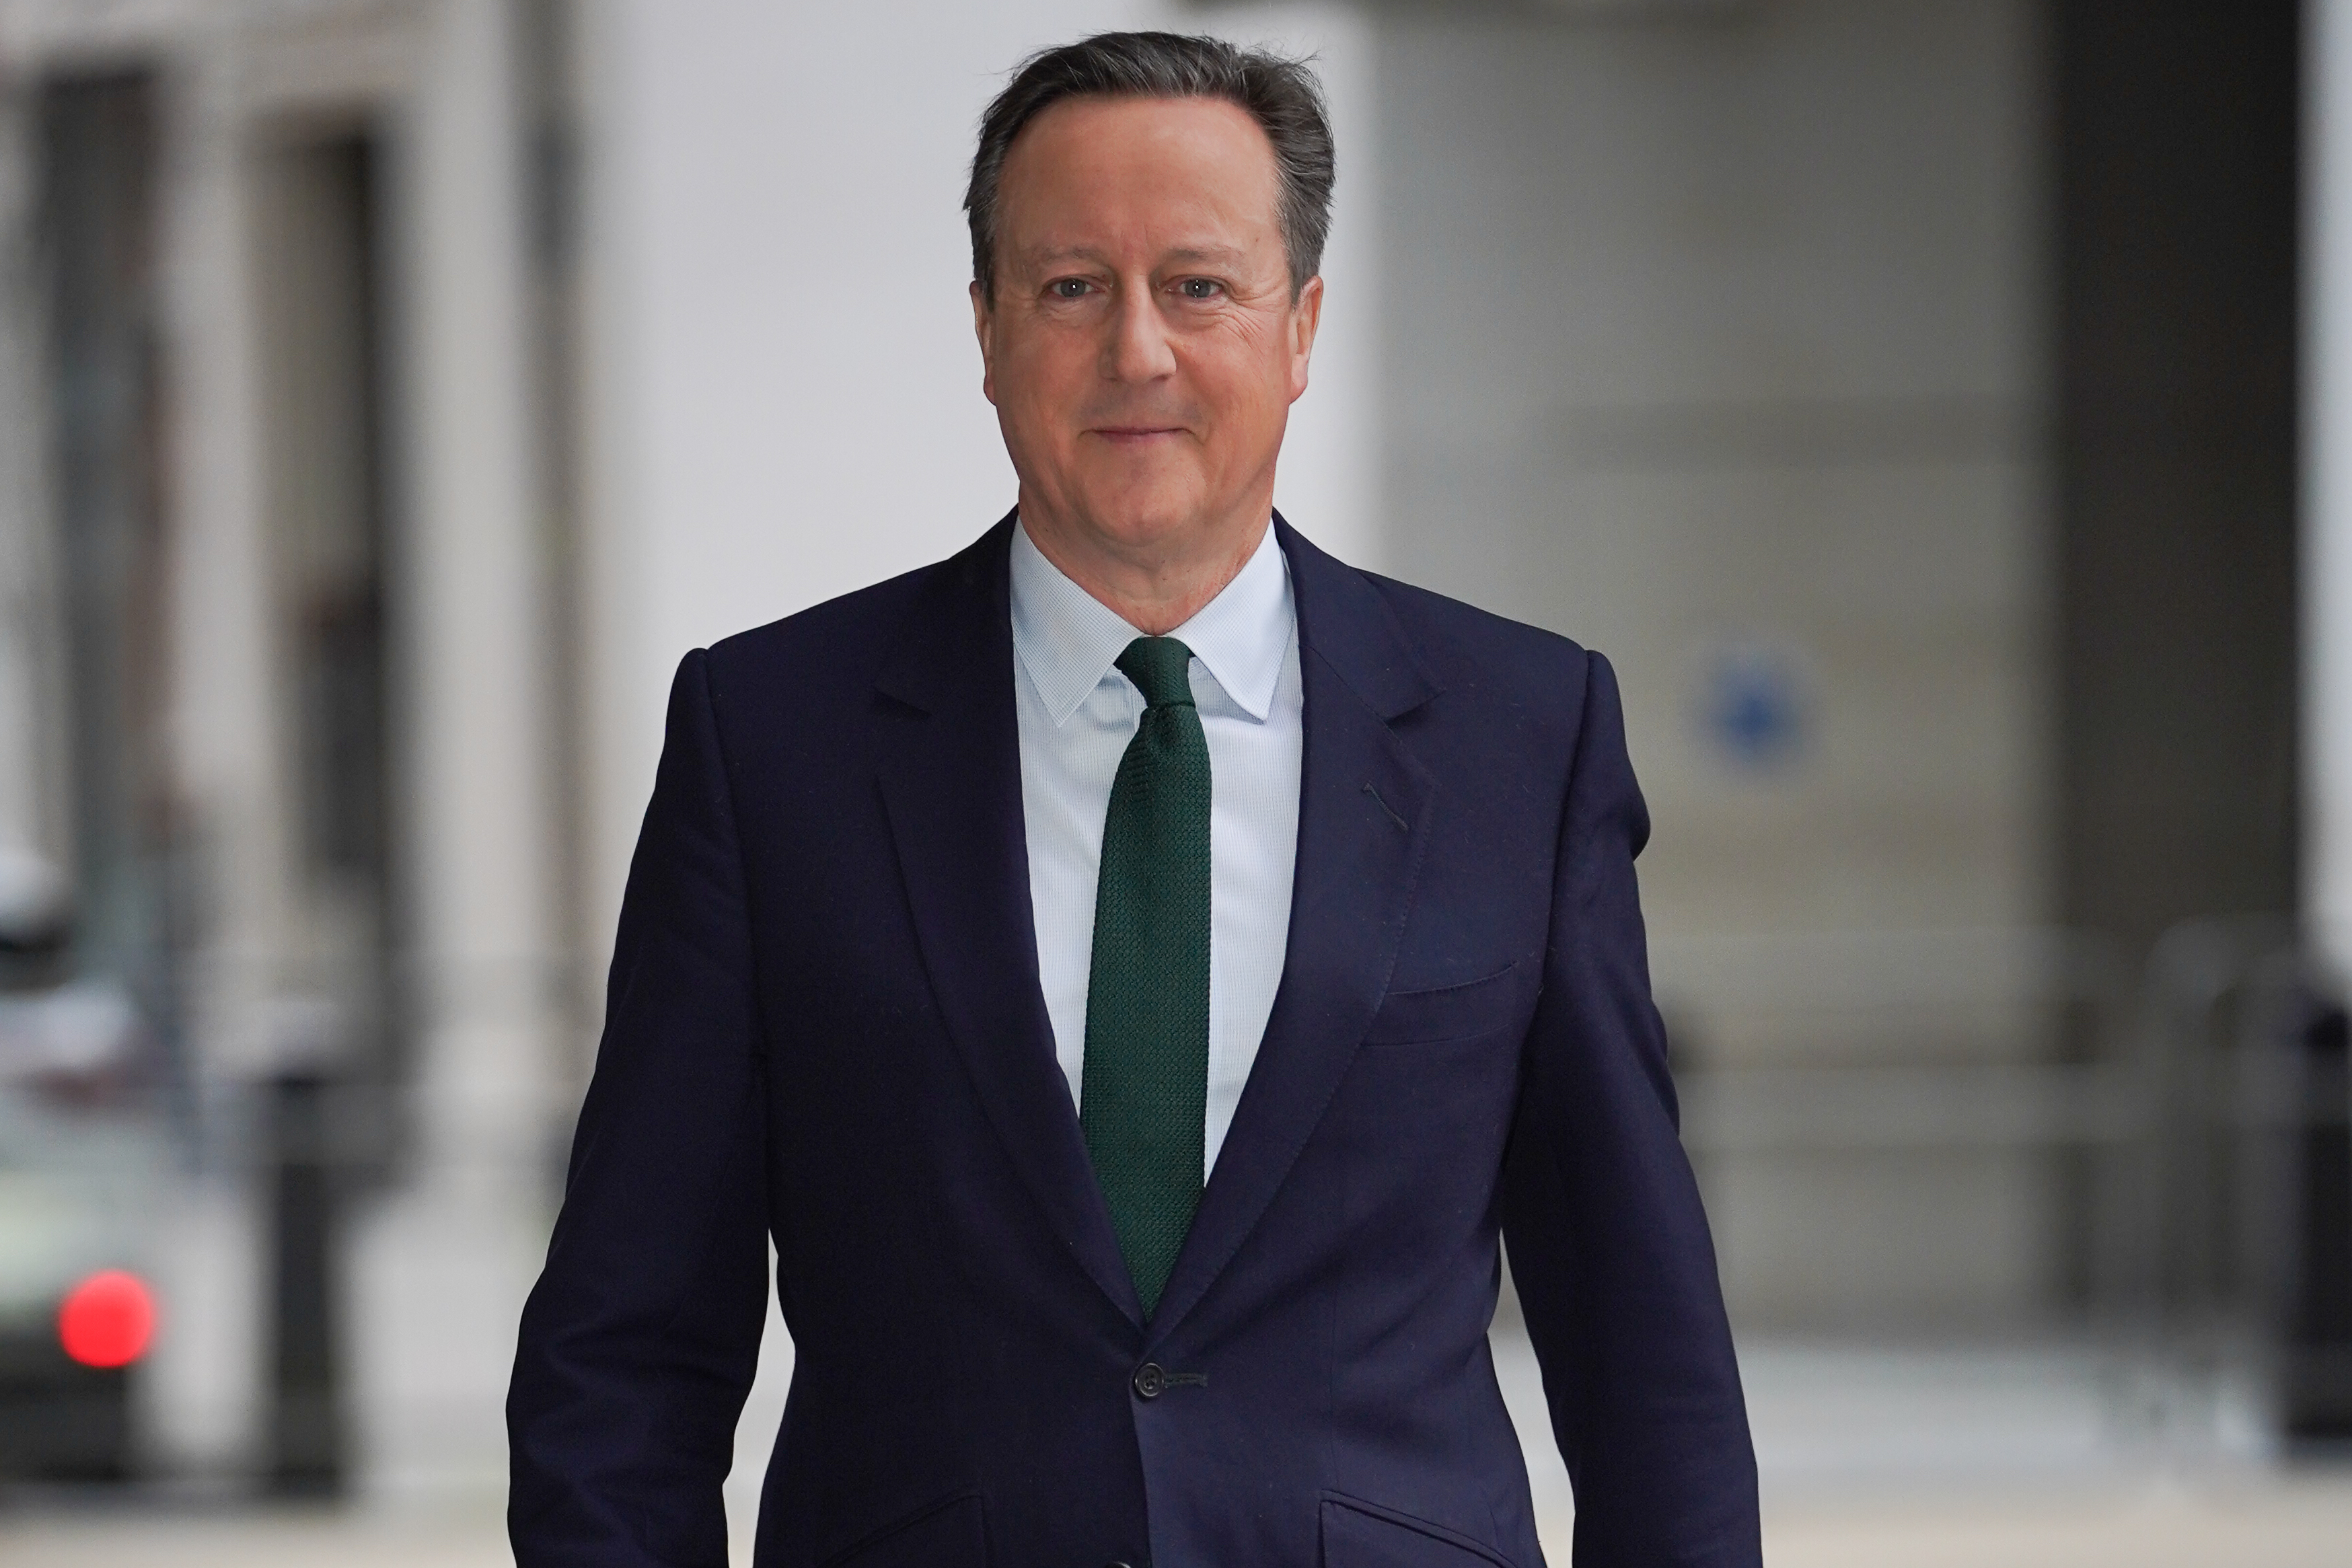 cameron to urge allies to show ‘will’ to support ukraine on eastern europe trip